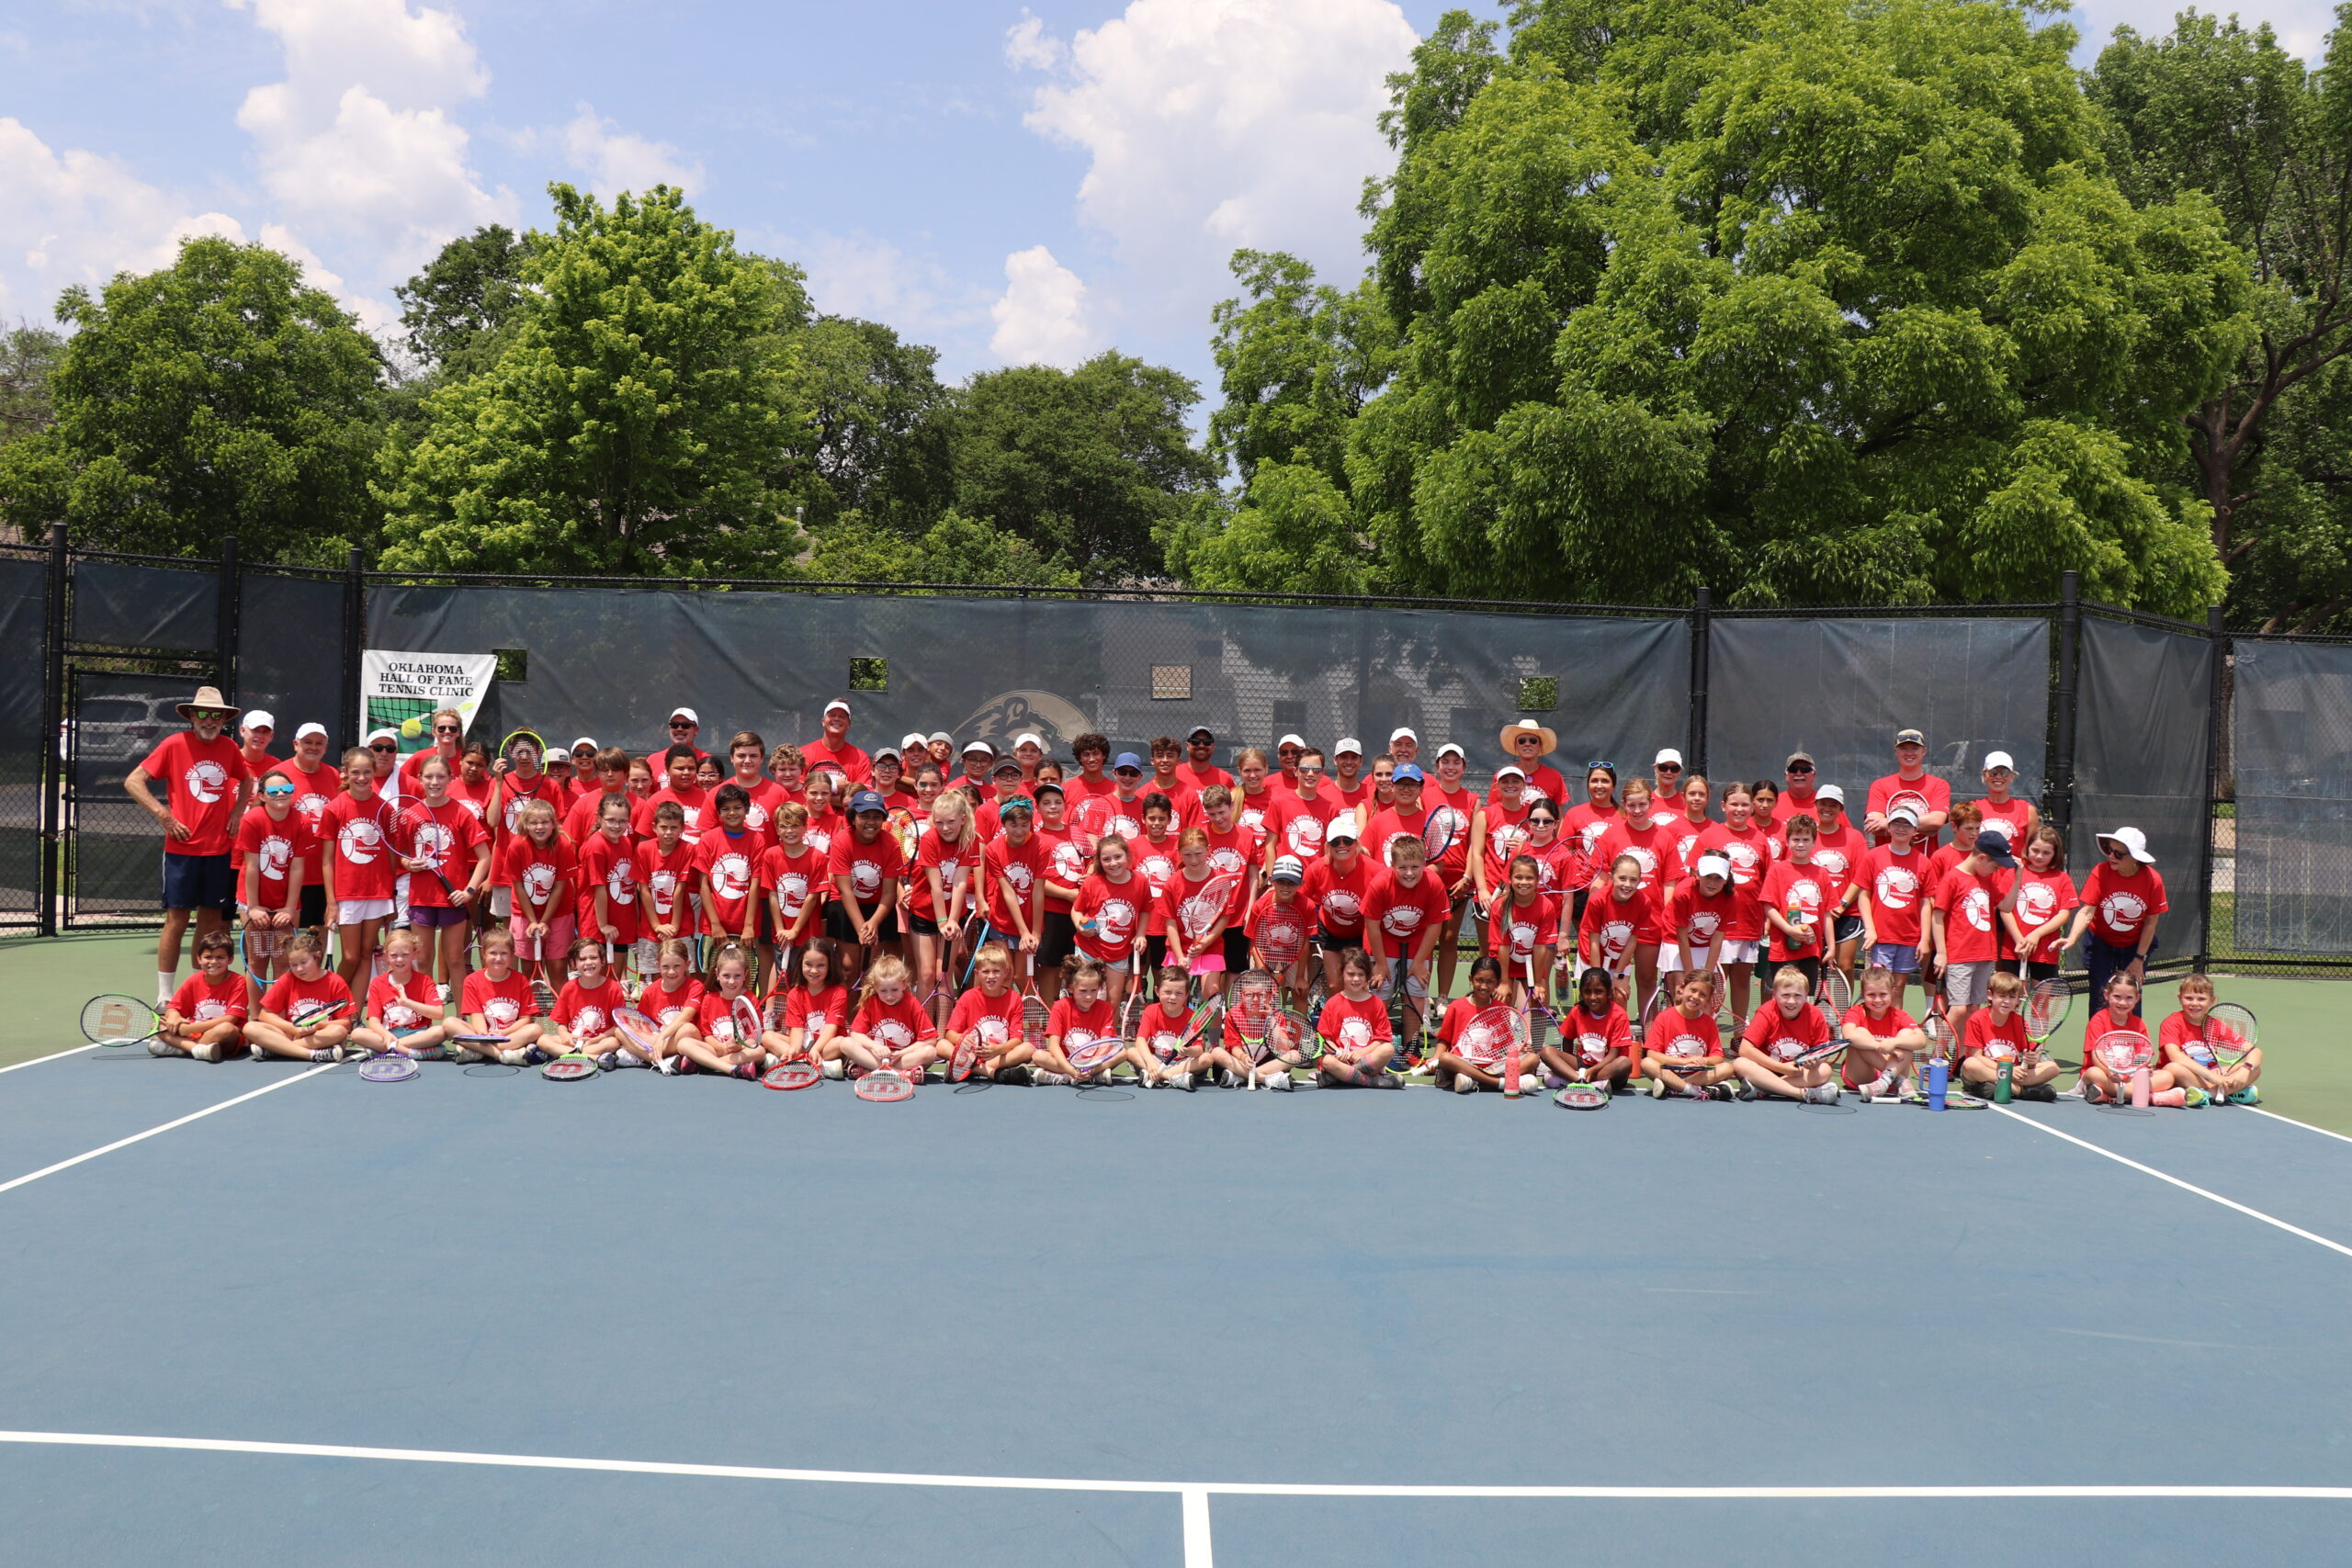 2023 Hall of Fame Tennis Clinic in Bartlesville, OK (Washington County)